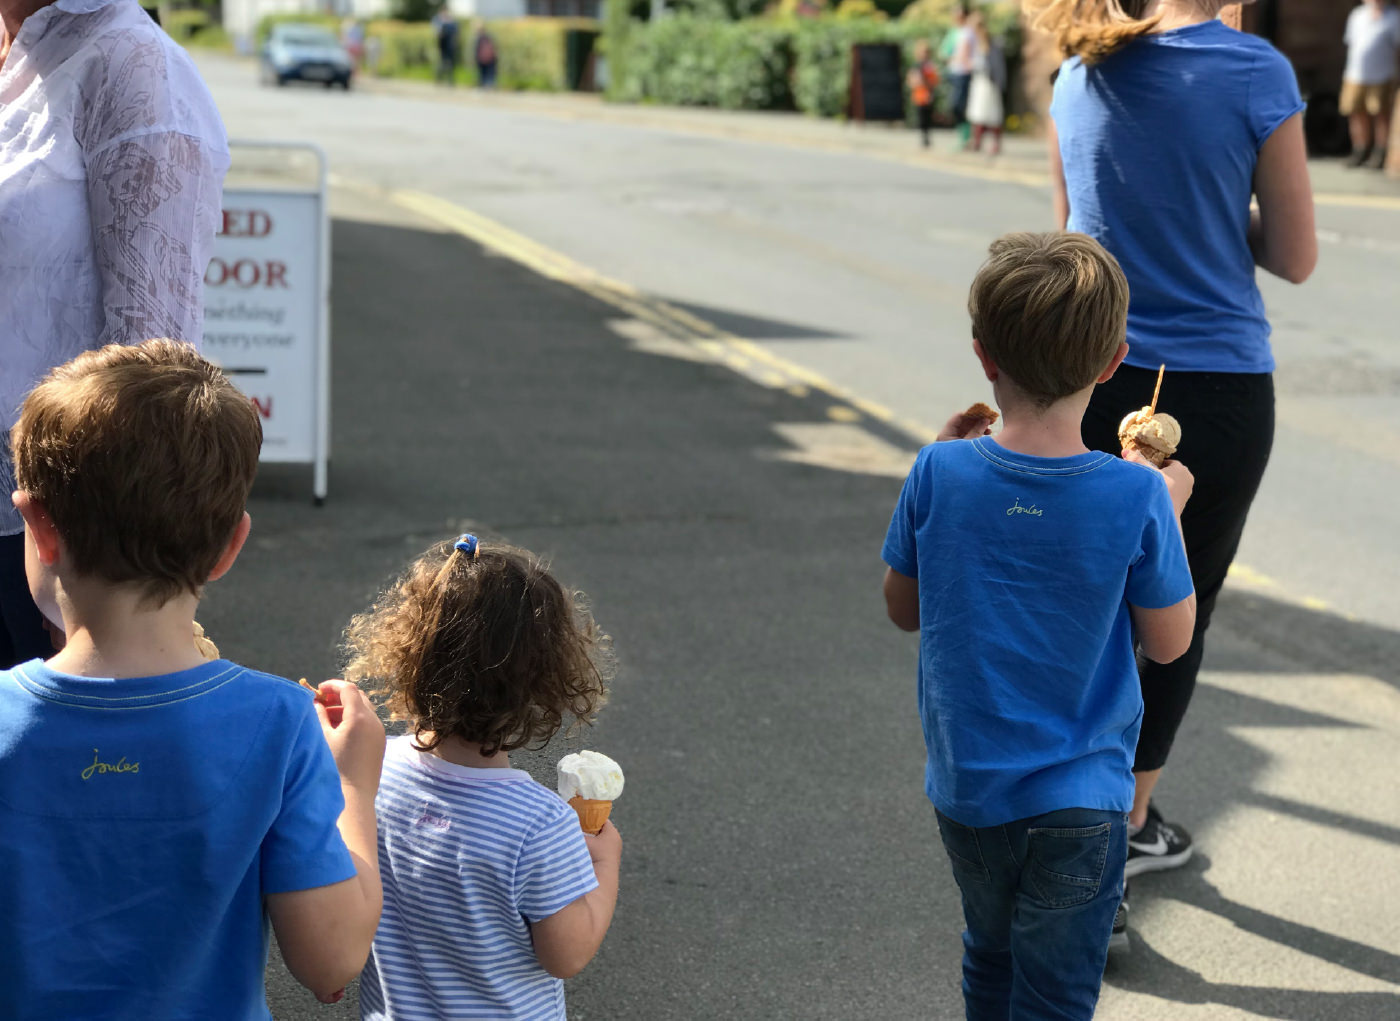 Children leaving The Parlour with ice creams